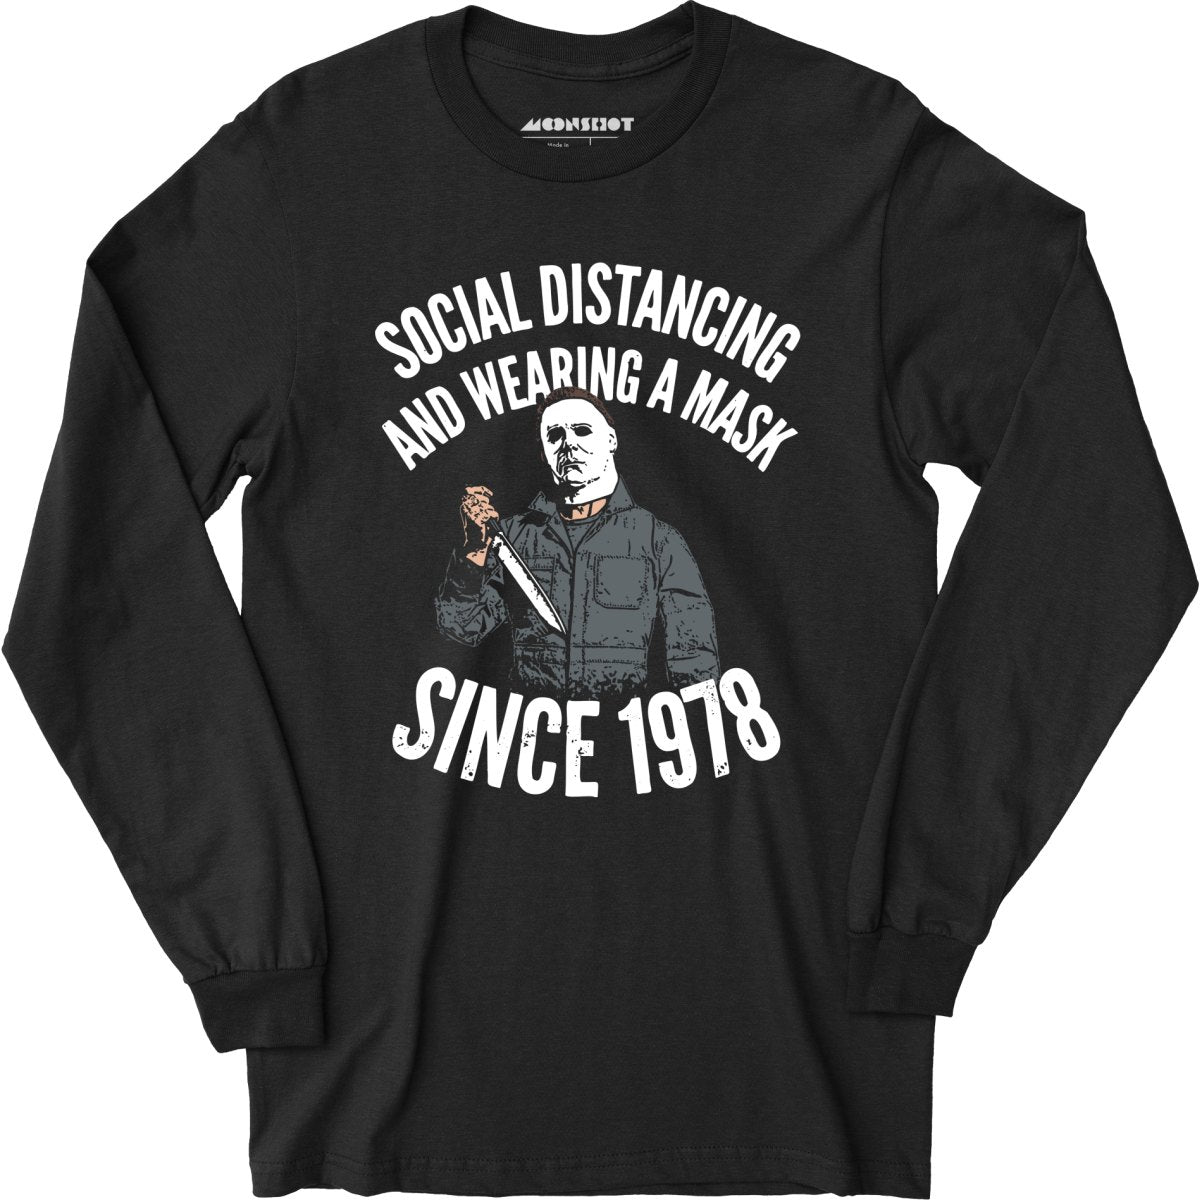 Social Distancing and Wearing a Mask Since 1978 - Long Sleeve T-Shirt